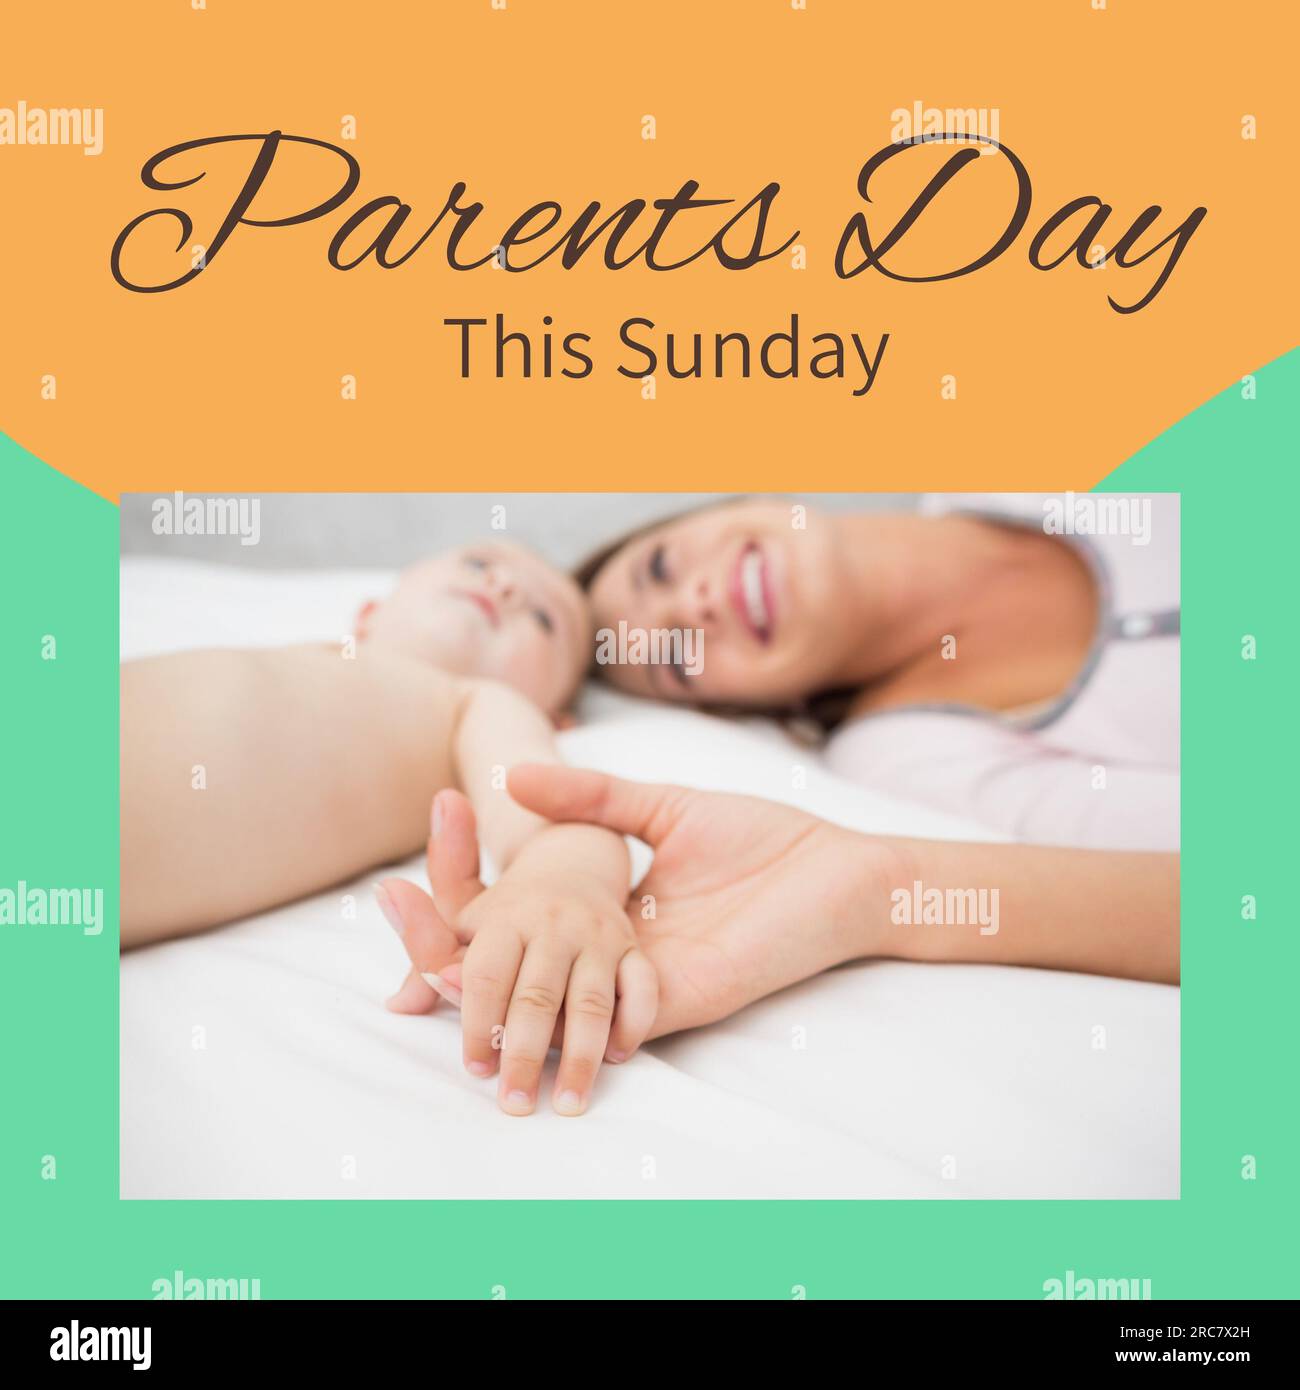 Parents day, this sunday text on orange with happy caucasian mother holding baby's hand Stock Photo